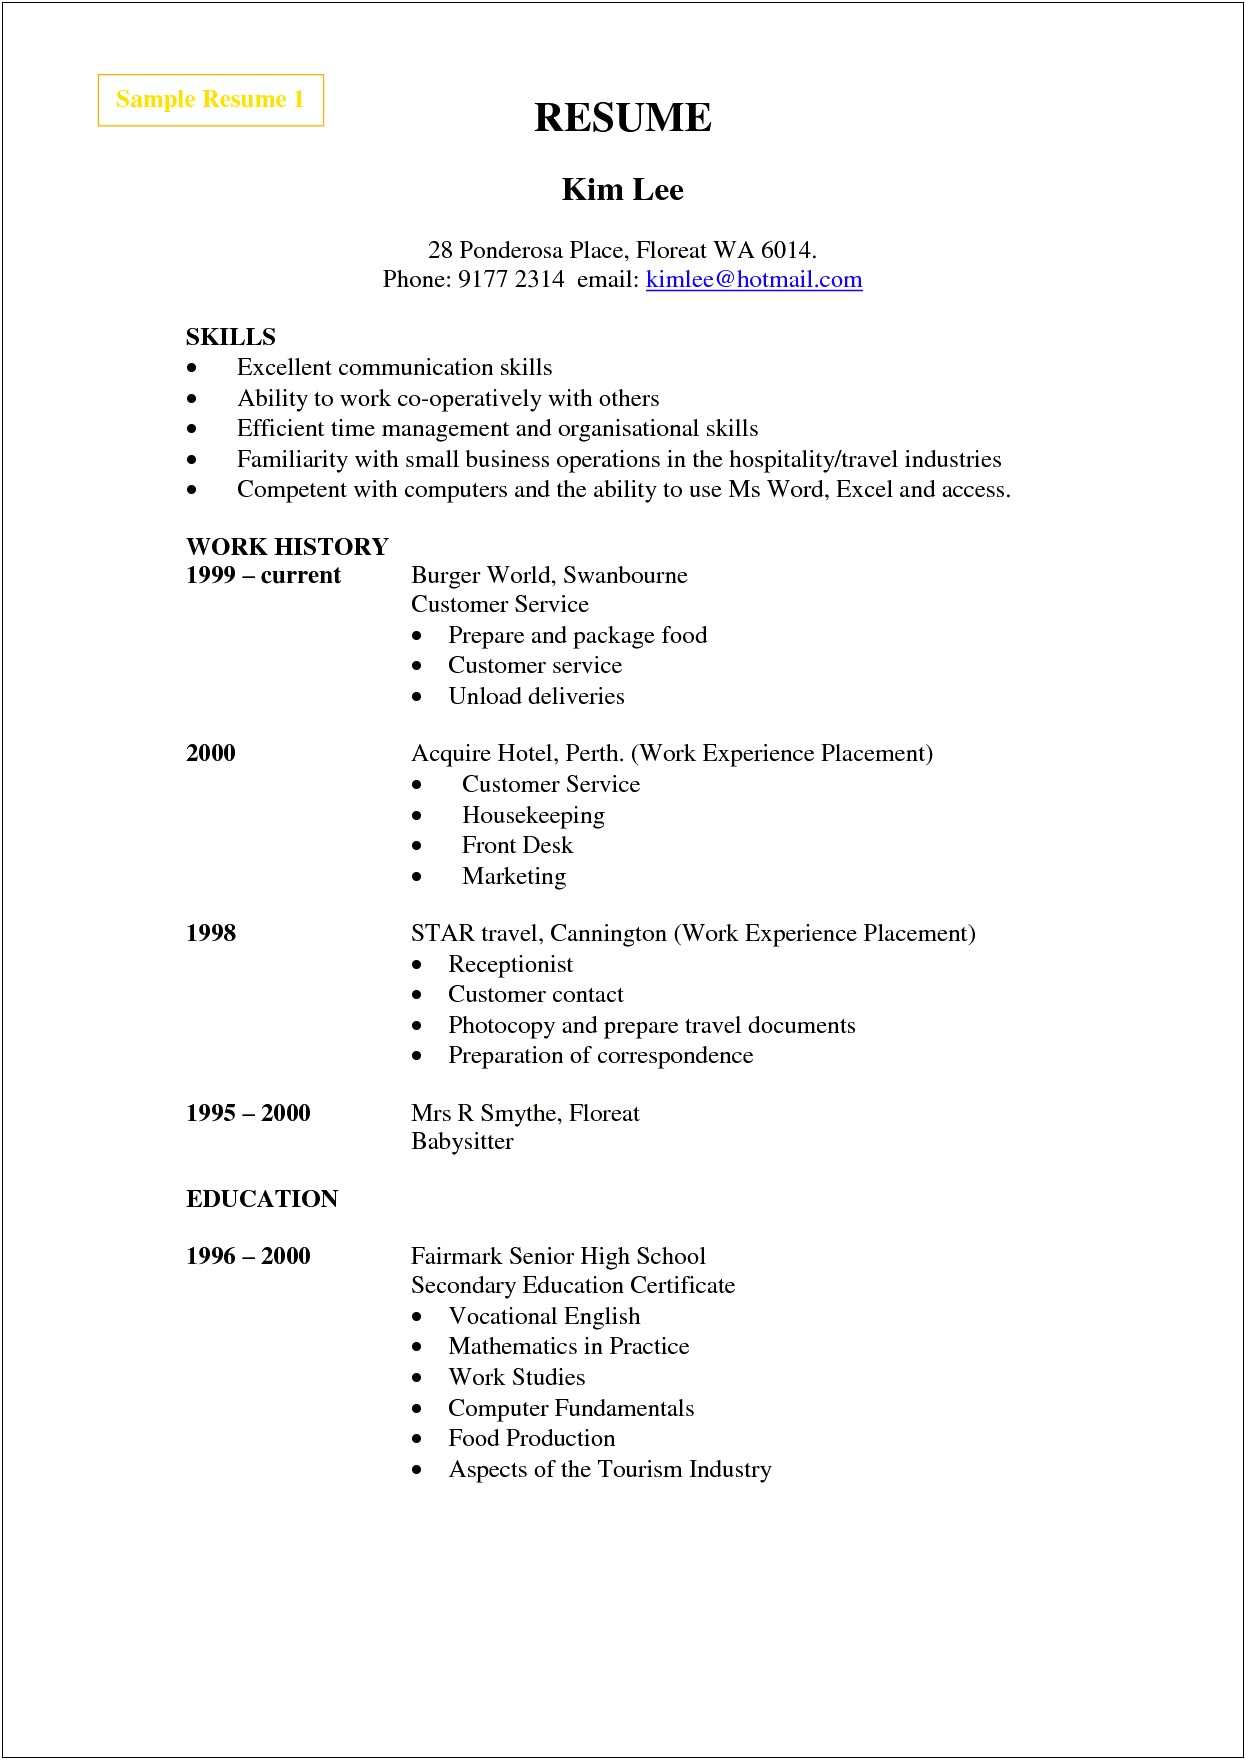 Example Resume For Cleaning Position